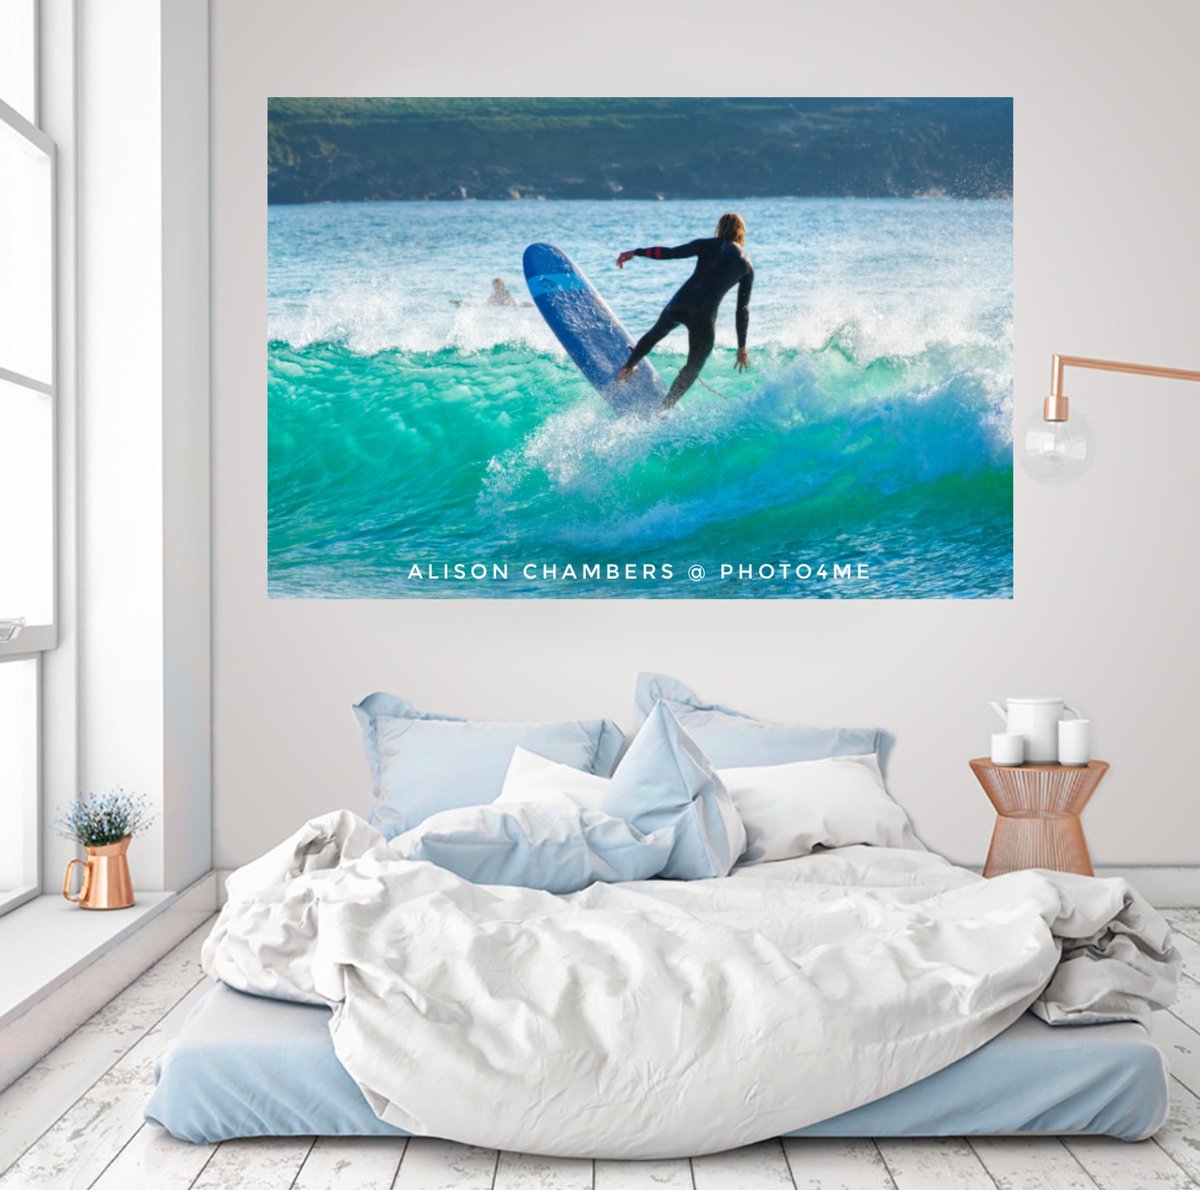 Fistral Beach Surfer©️. Available from; shop.photo4me.com/1331079 & redbubble.com/shop/ap/161133… & 2-alison-chambers.pixels.com #fistralbeach #fistral #newquay #newquaycornwall #newquaysurf #surfing #surfer #sure #Photo4Me #redbubble #fineartamerica